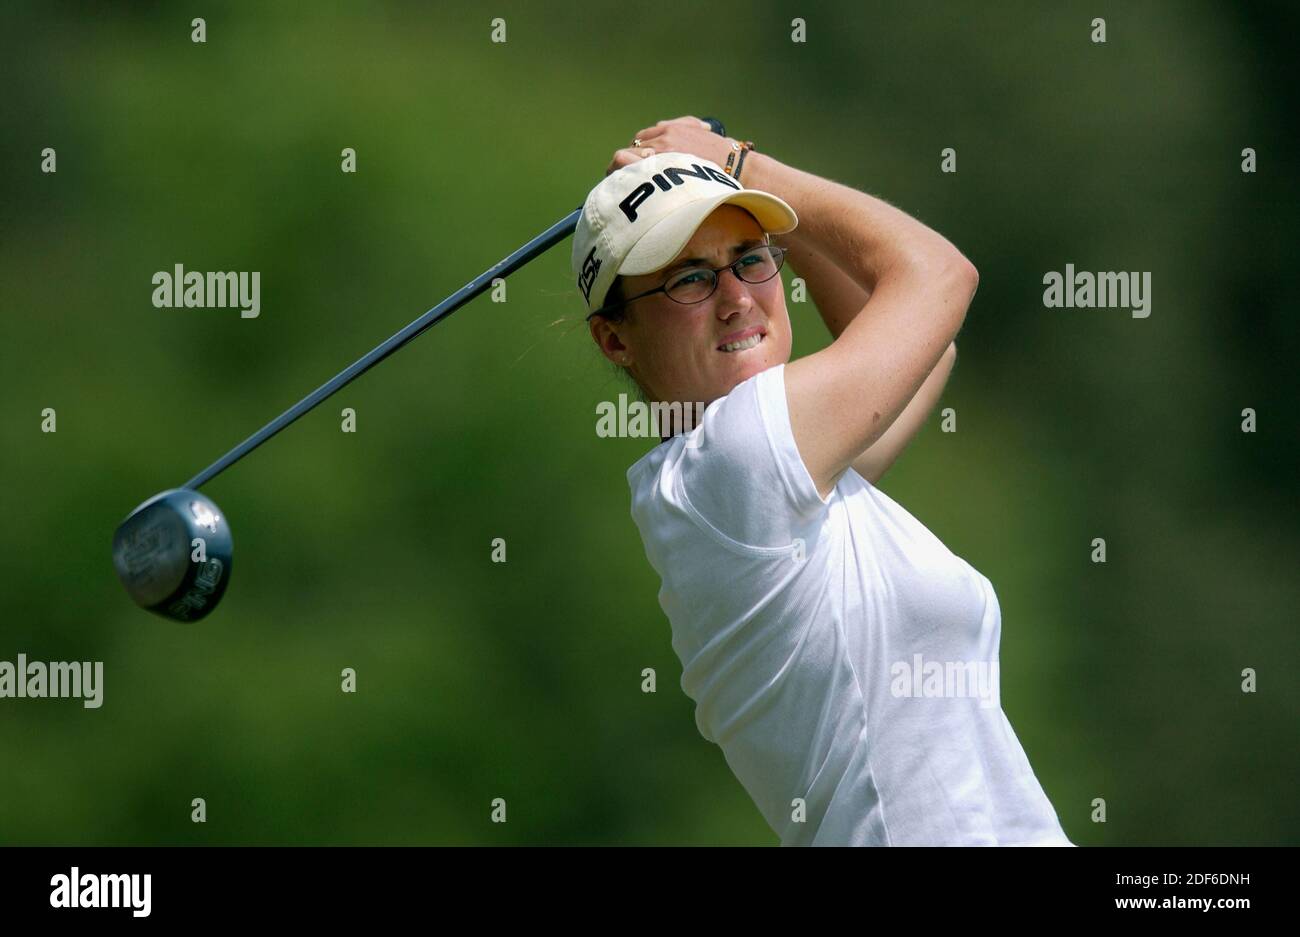 La Perla Golf Clothing High Resolution Stock Photography and Images - Alamy